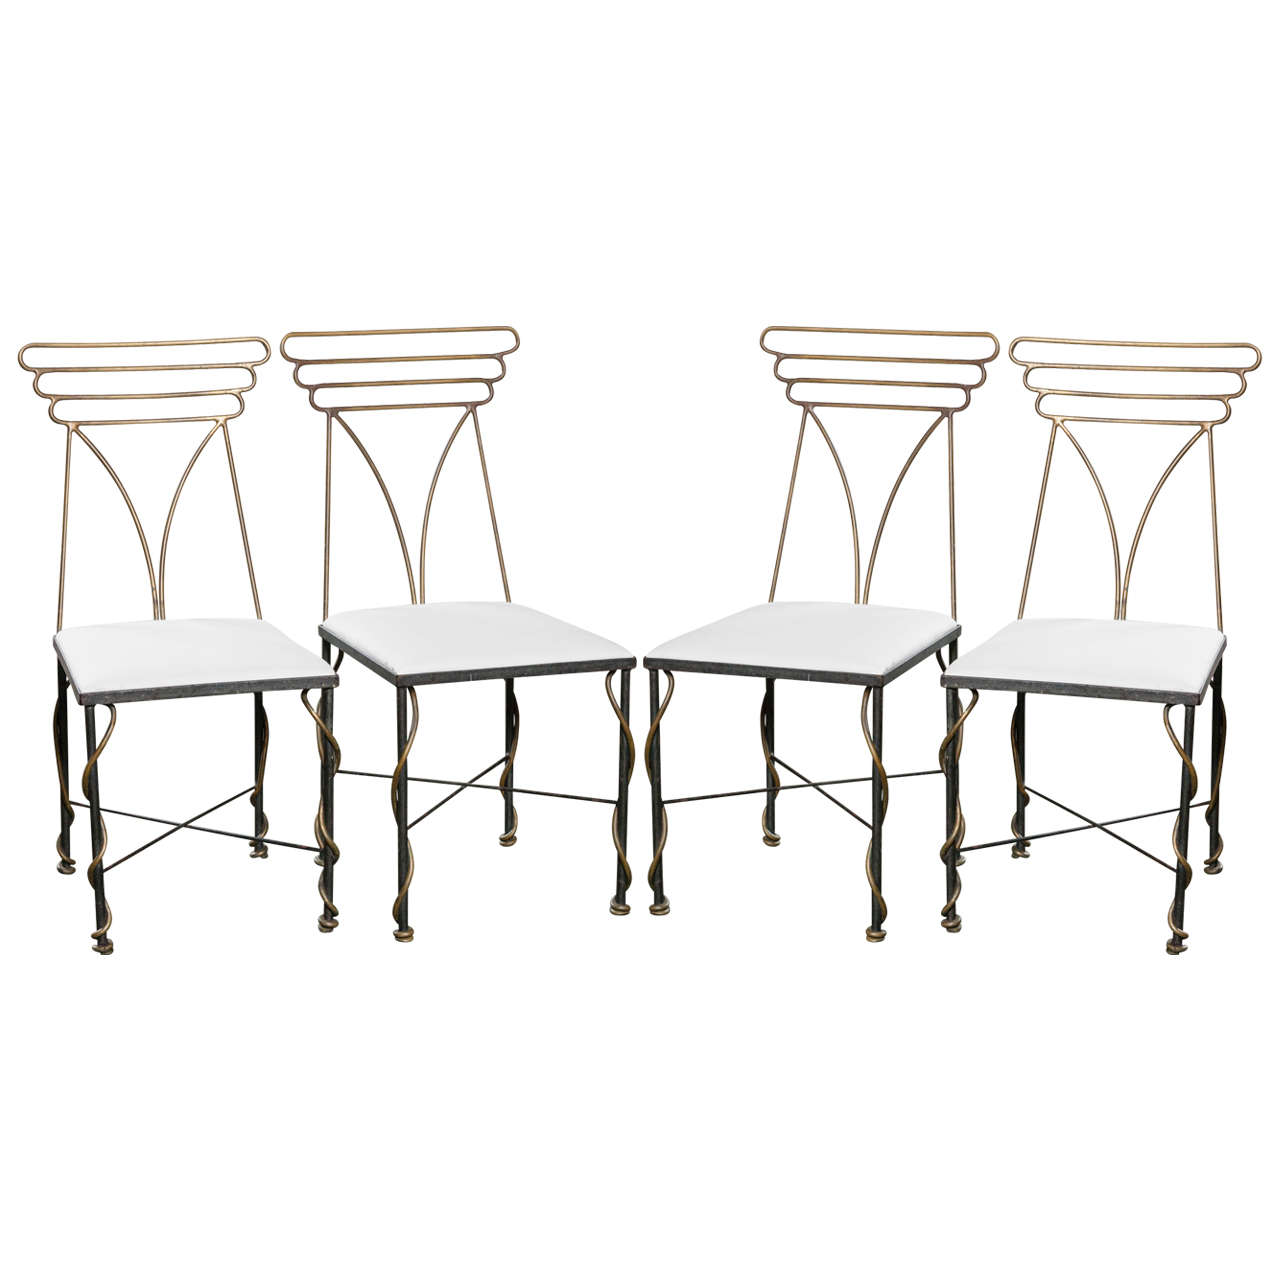 Set of Four French Bronze Chairs